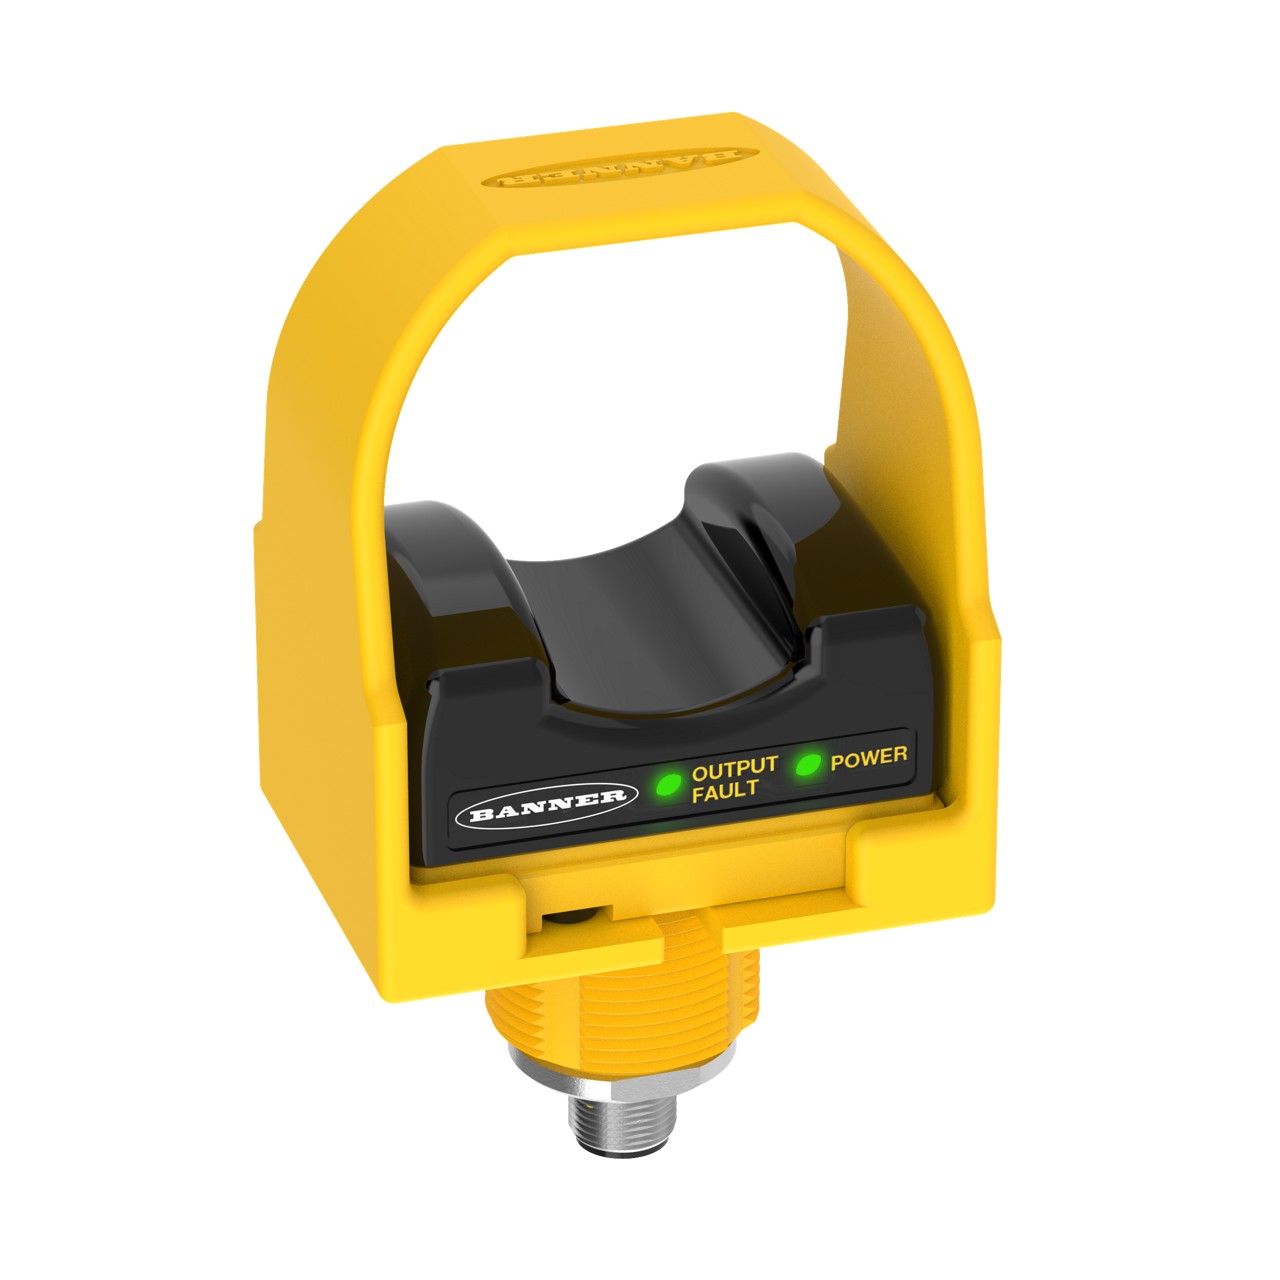 STBVR81Q6 - STB Series: Self-Checking Touch Button w/Yellow F.C.; Input: 20-30 V ac or dc; Upper Hou